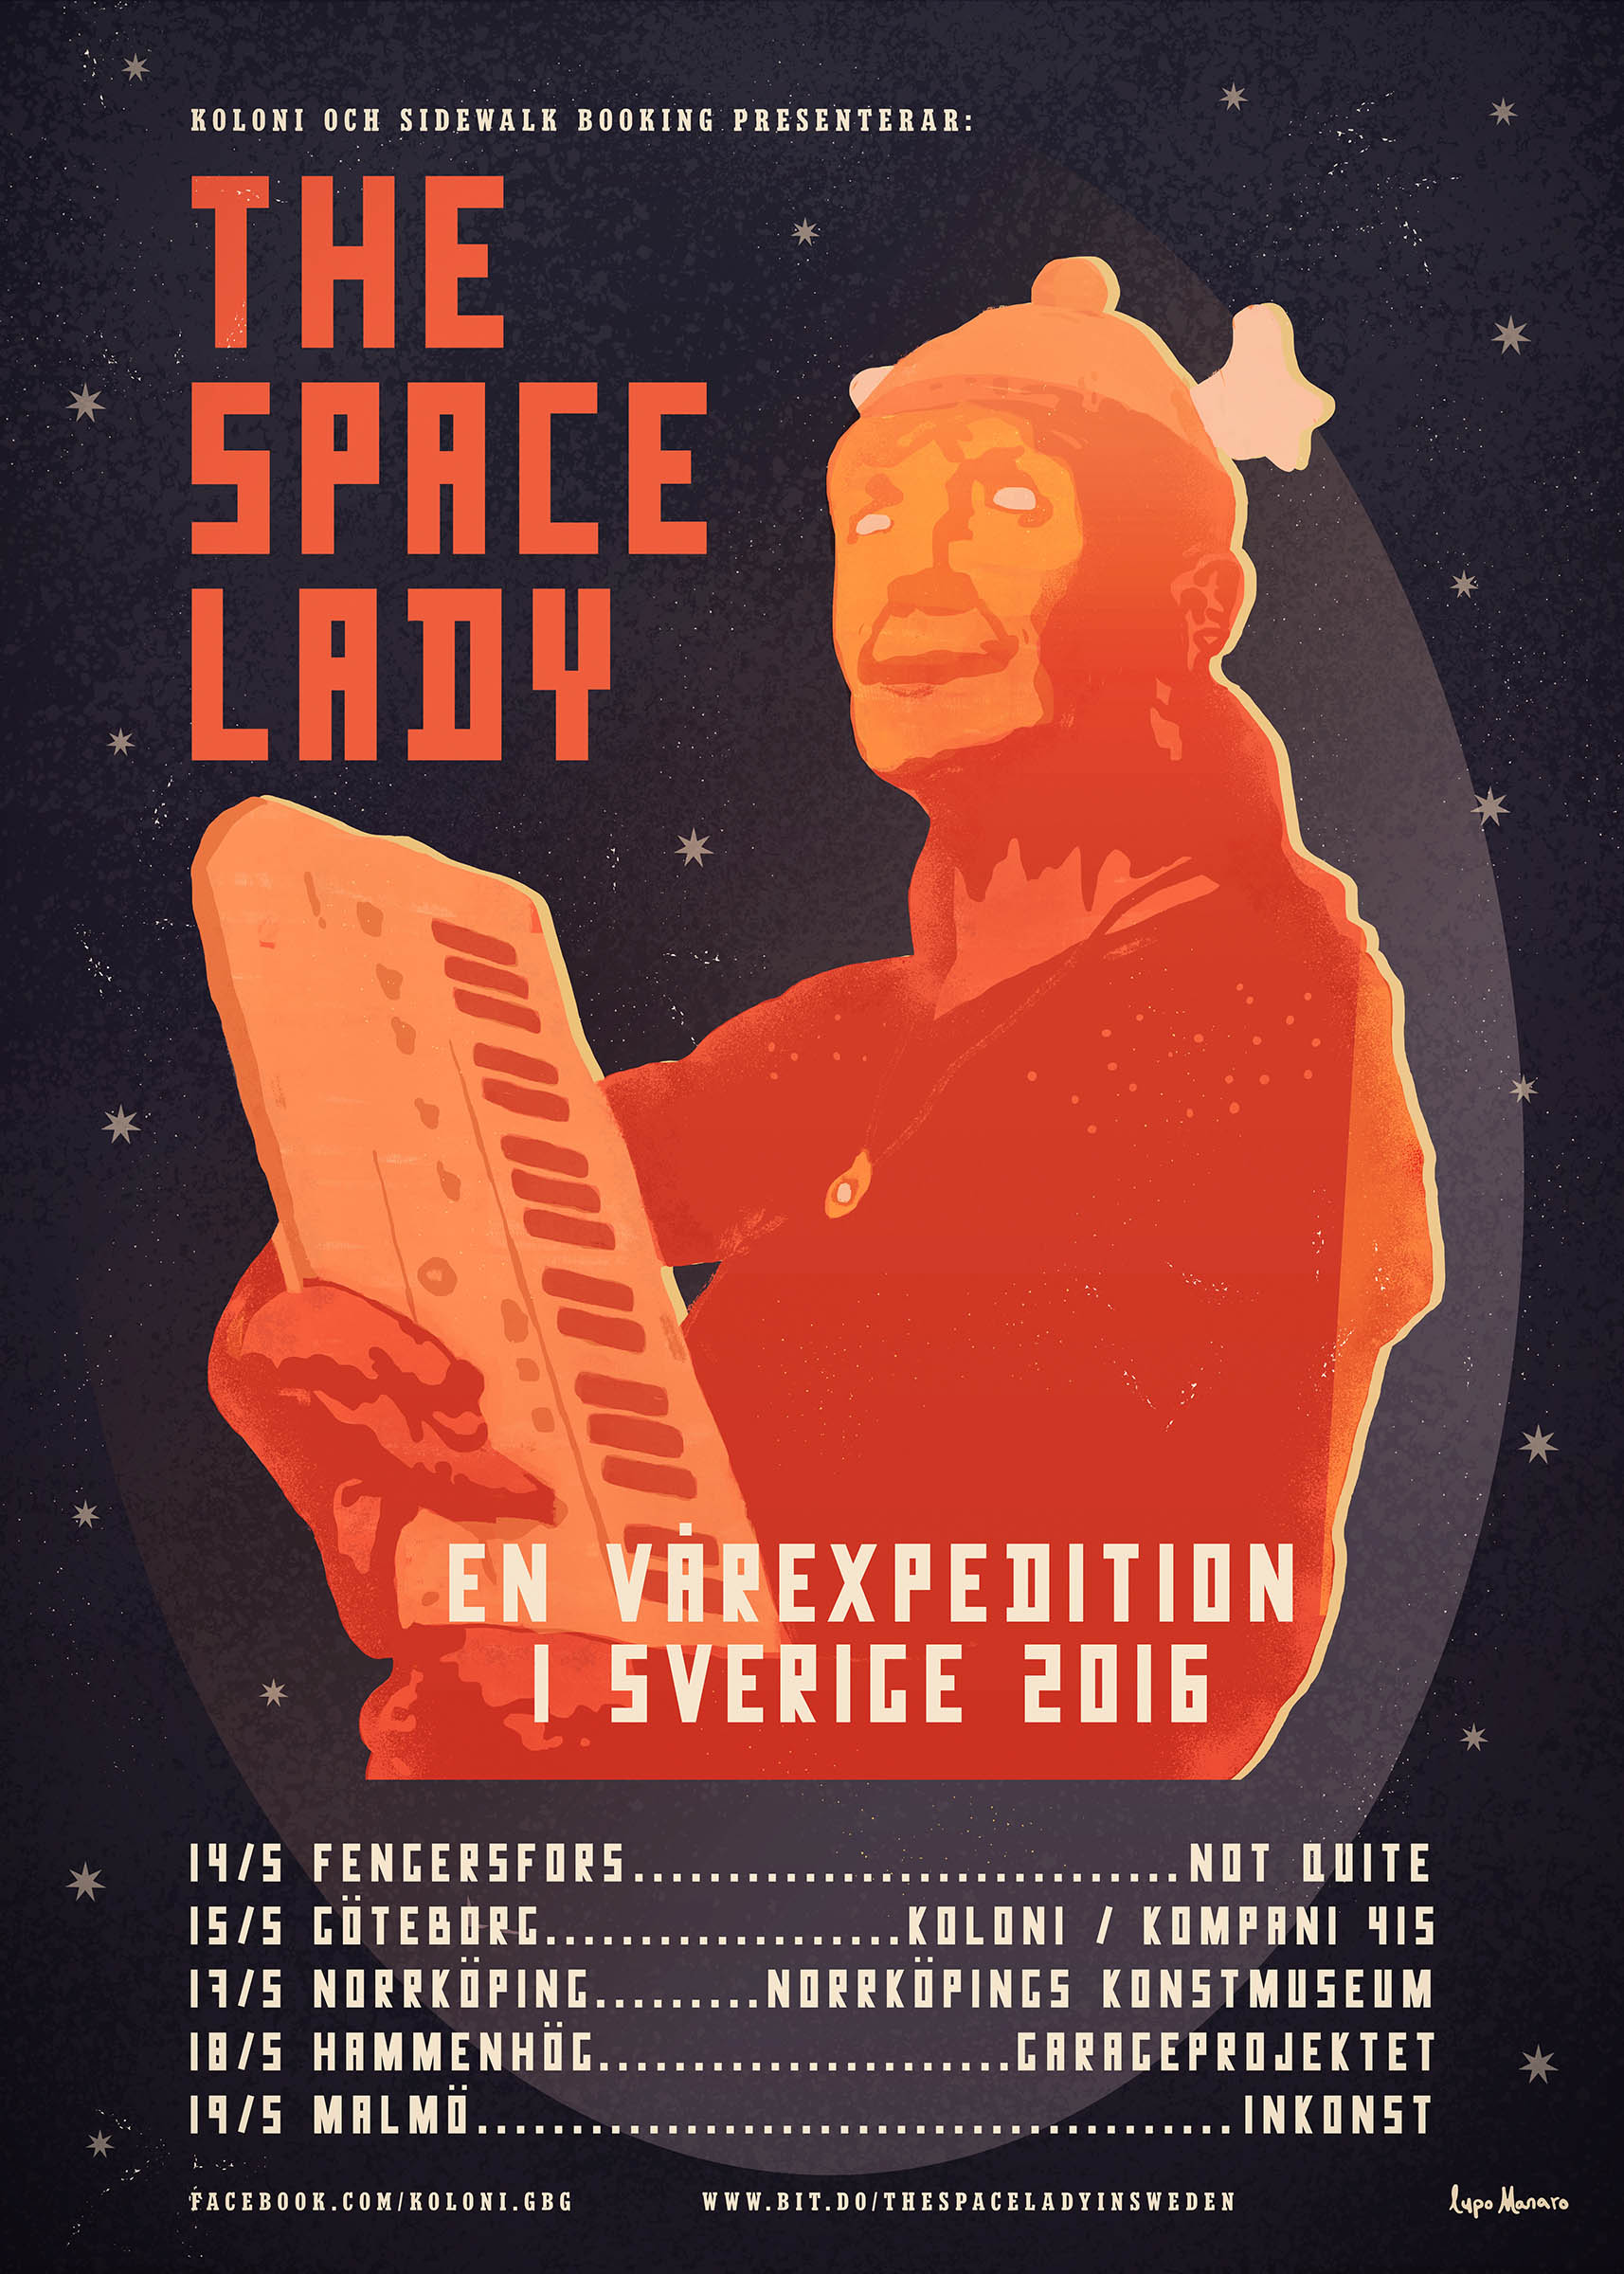 The Space Lady standing with a keyboard in her arms against a starry sky.